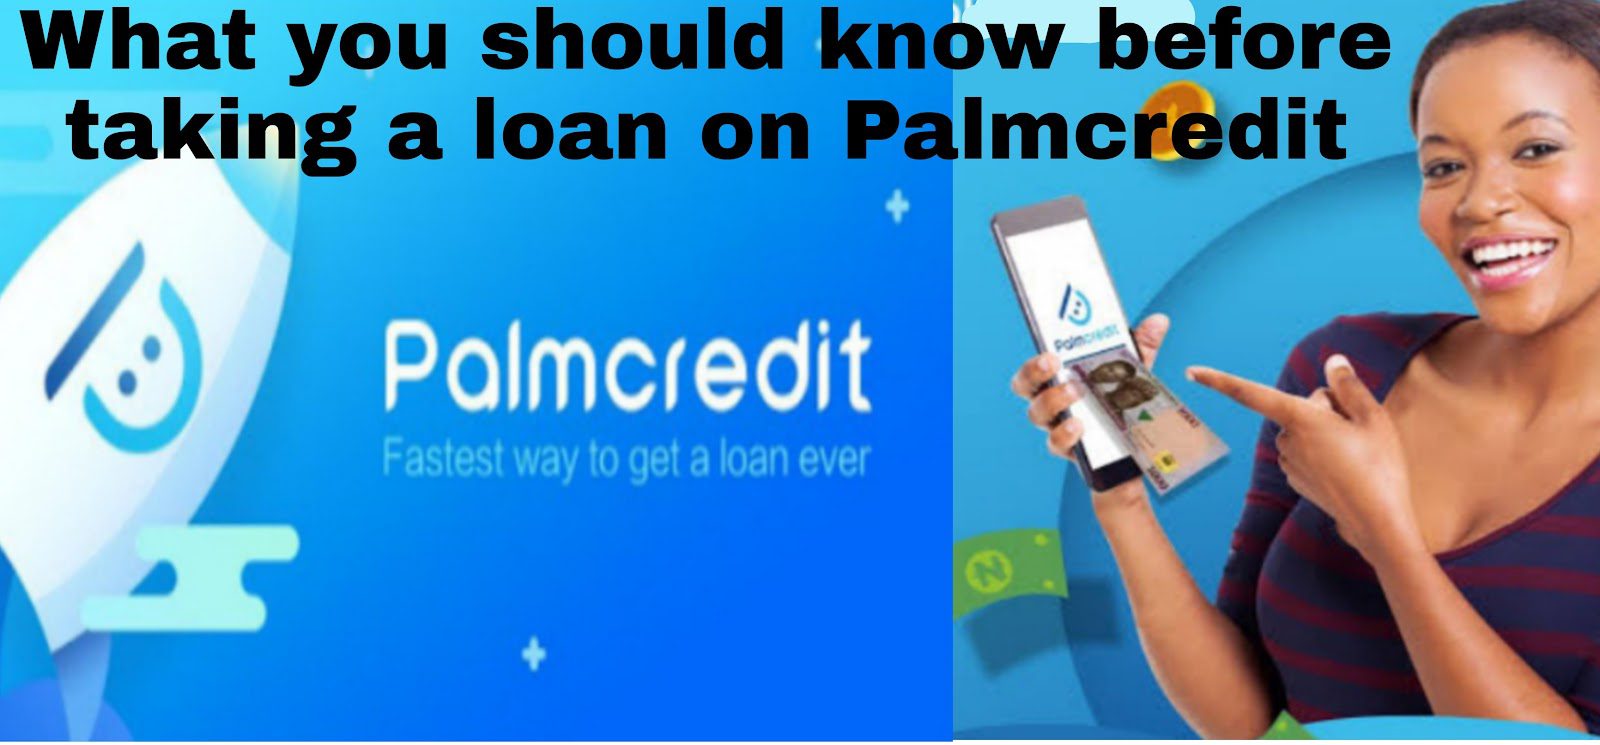 Palmcredit Review: How To Get A Loan Easily On Palmcredit